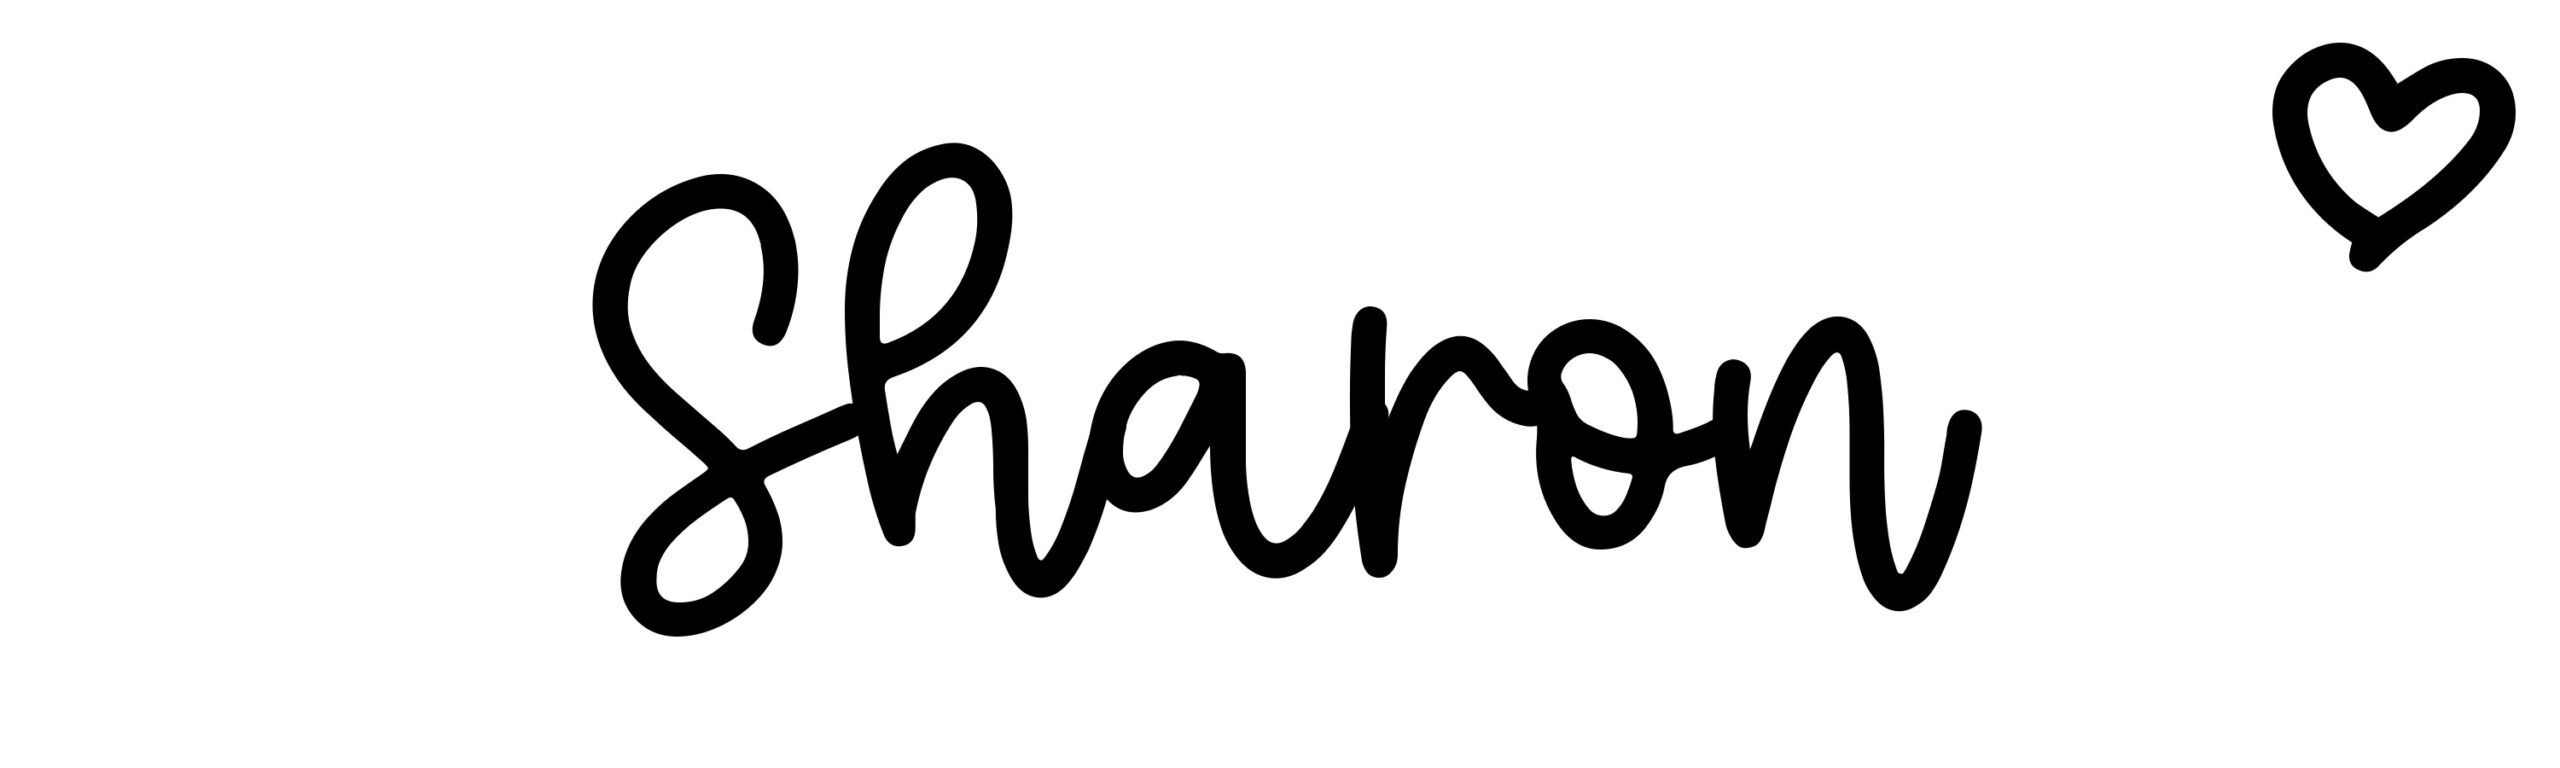 Sharon - Name meaning, origin, variations and more